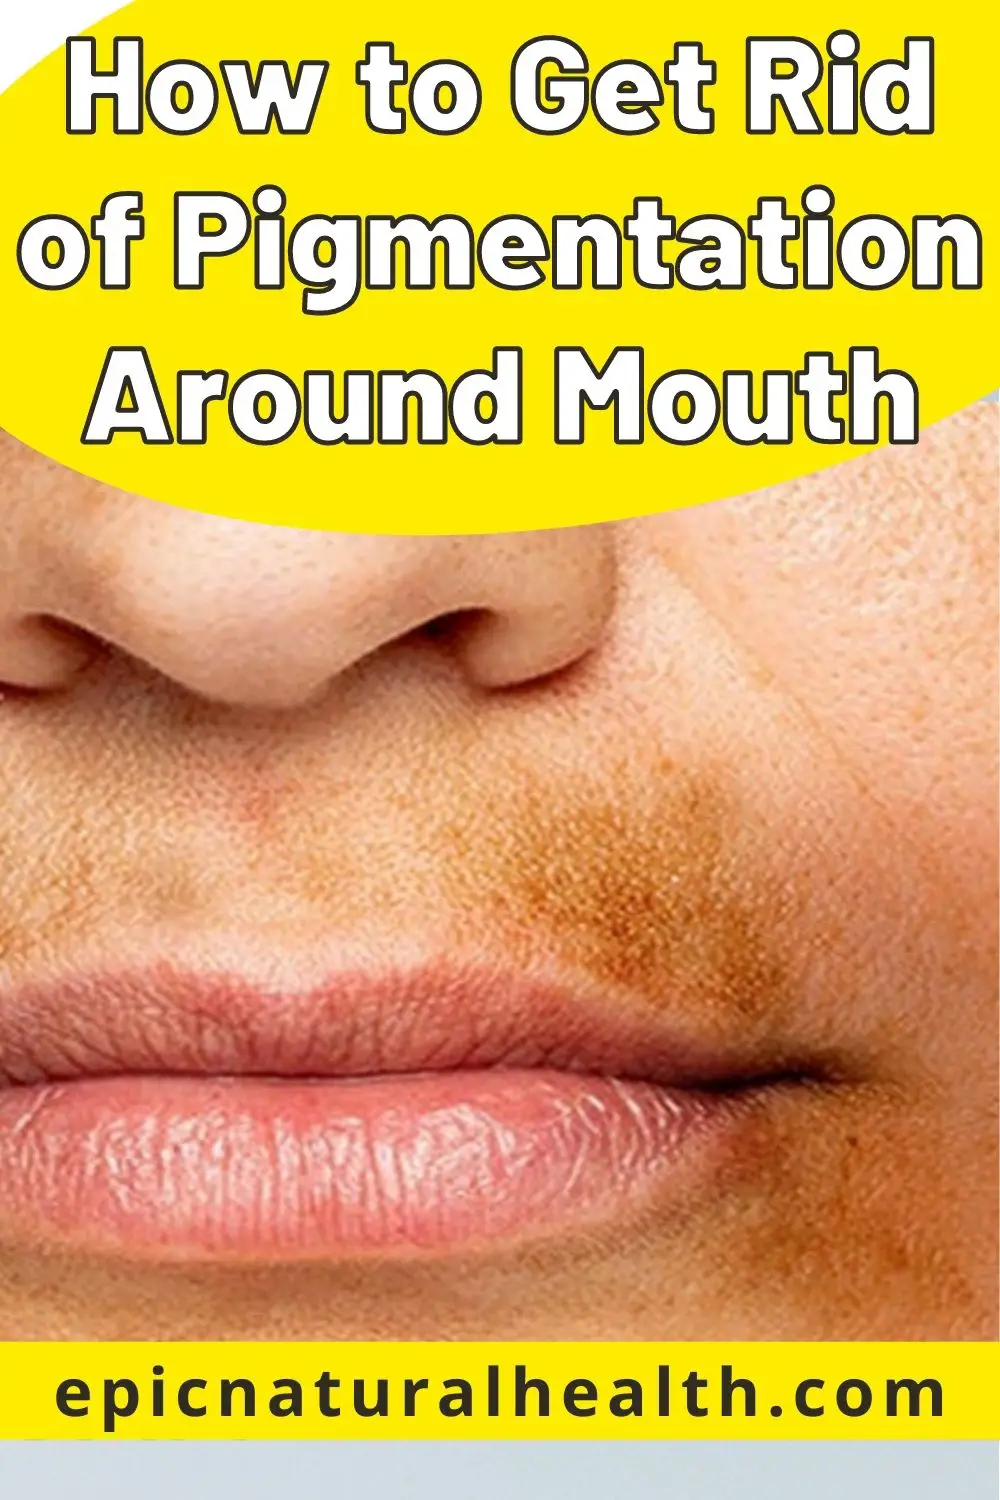 How to Get Rid of Pigmentation Around Mouth